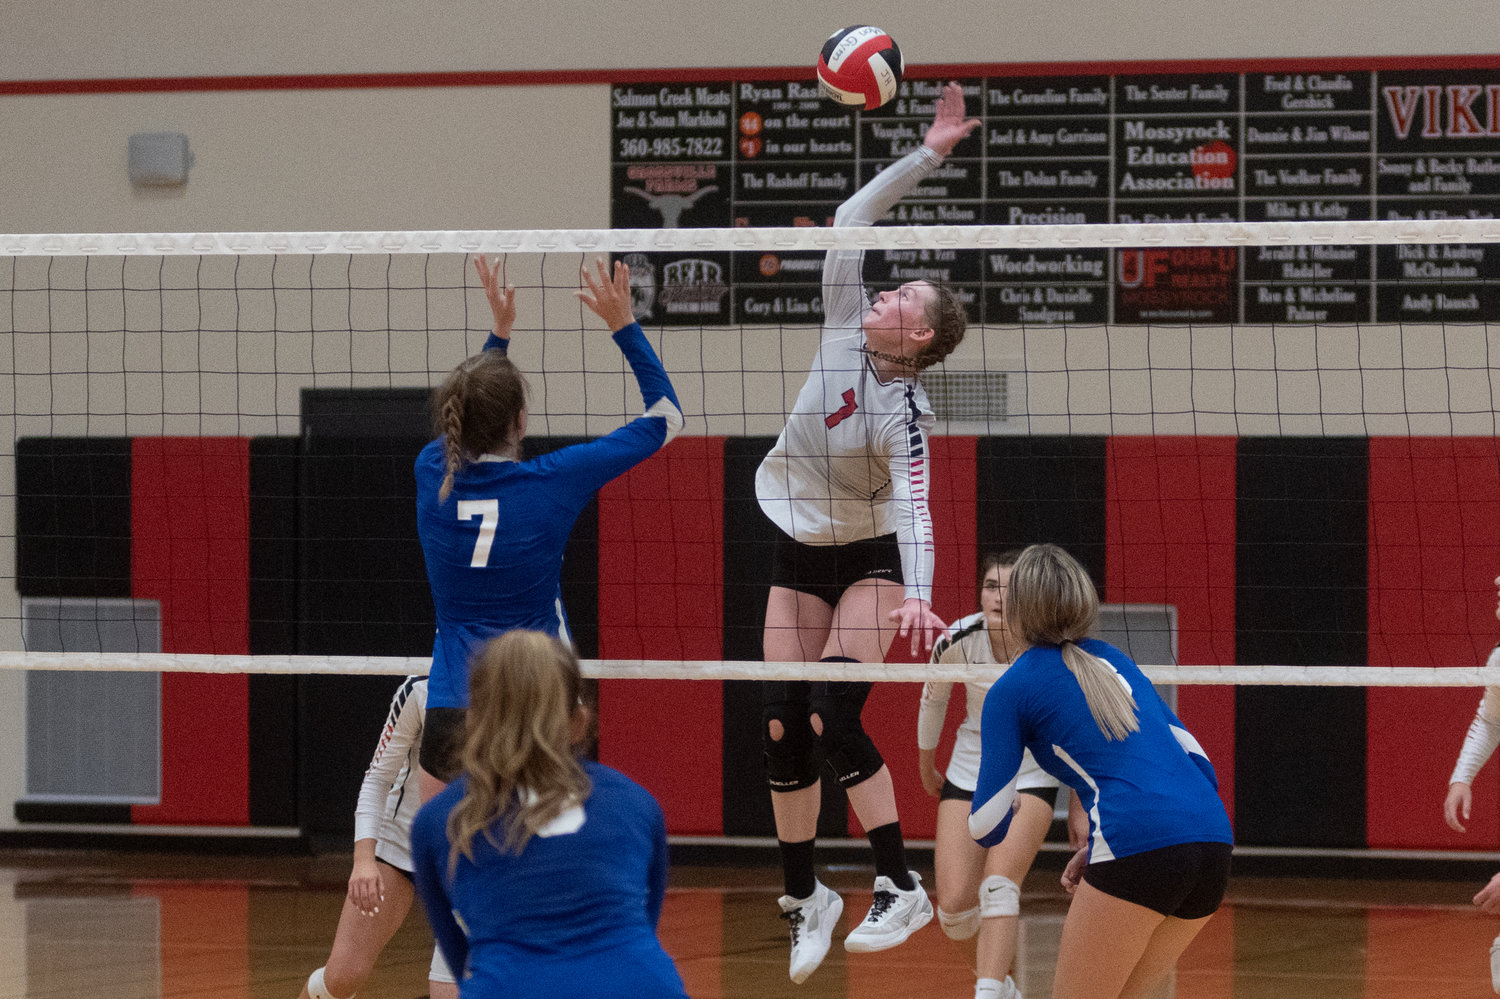 Junior middle Paige Houghtelling goes up for a spike in Mossyrock's five set loss to Toutle Lake Wednesday night.